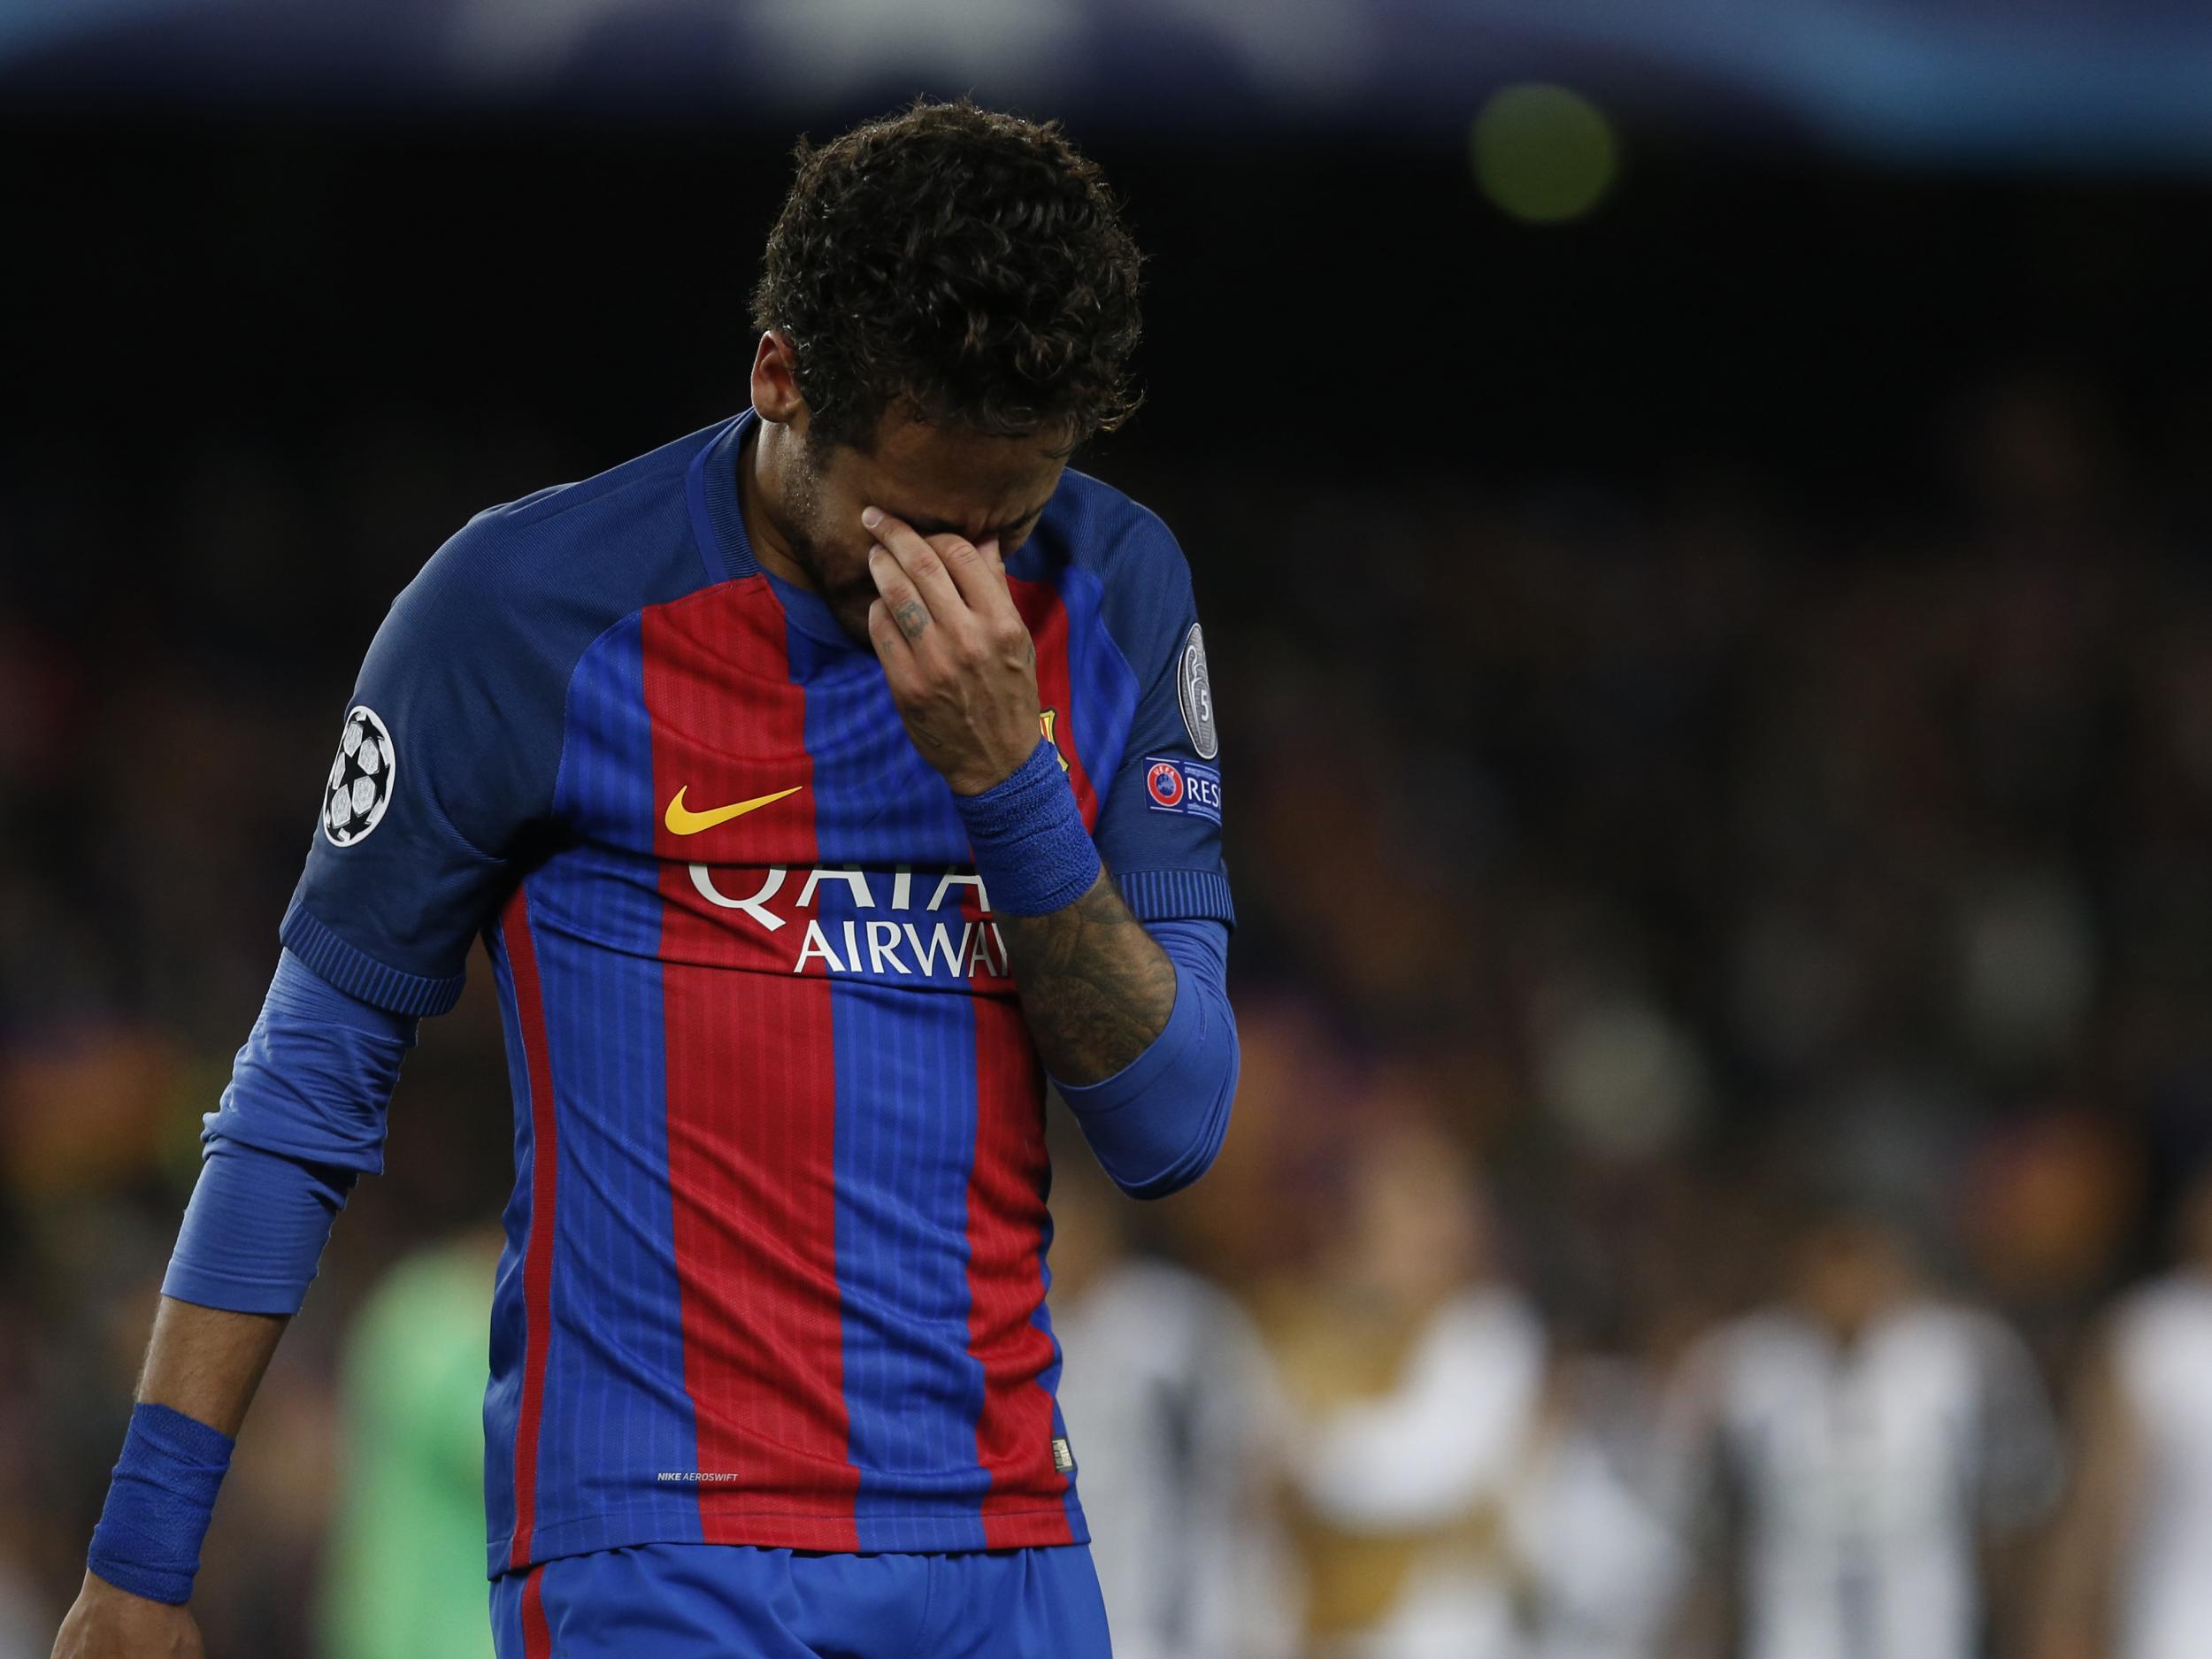 Neymar will not appear in the clasico against Real Madrid